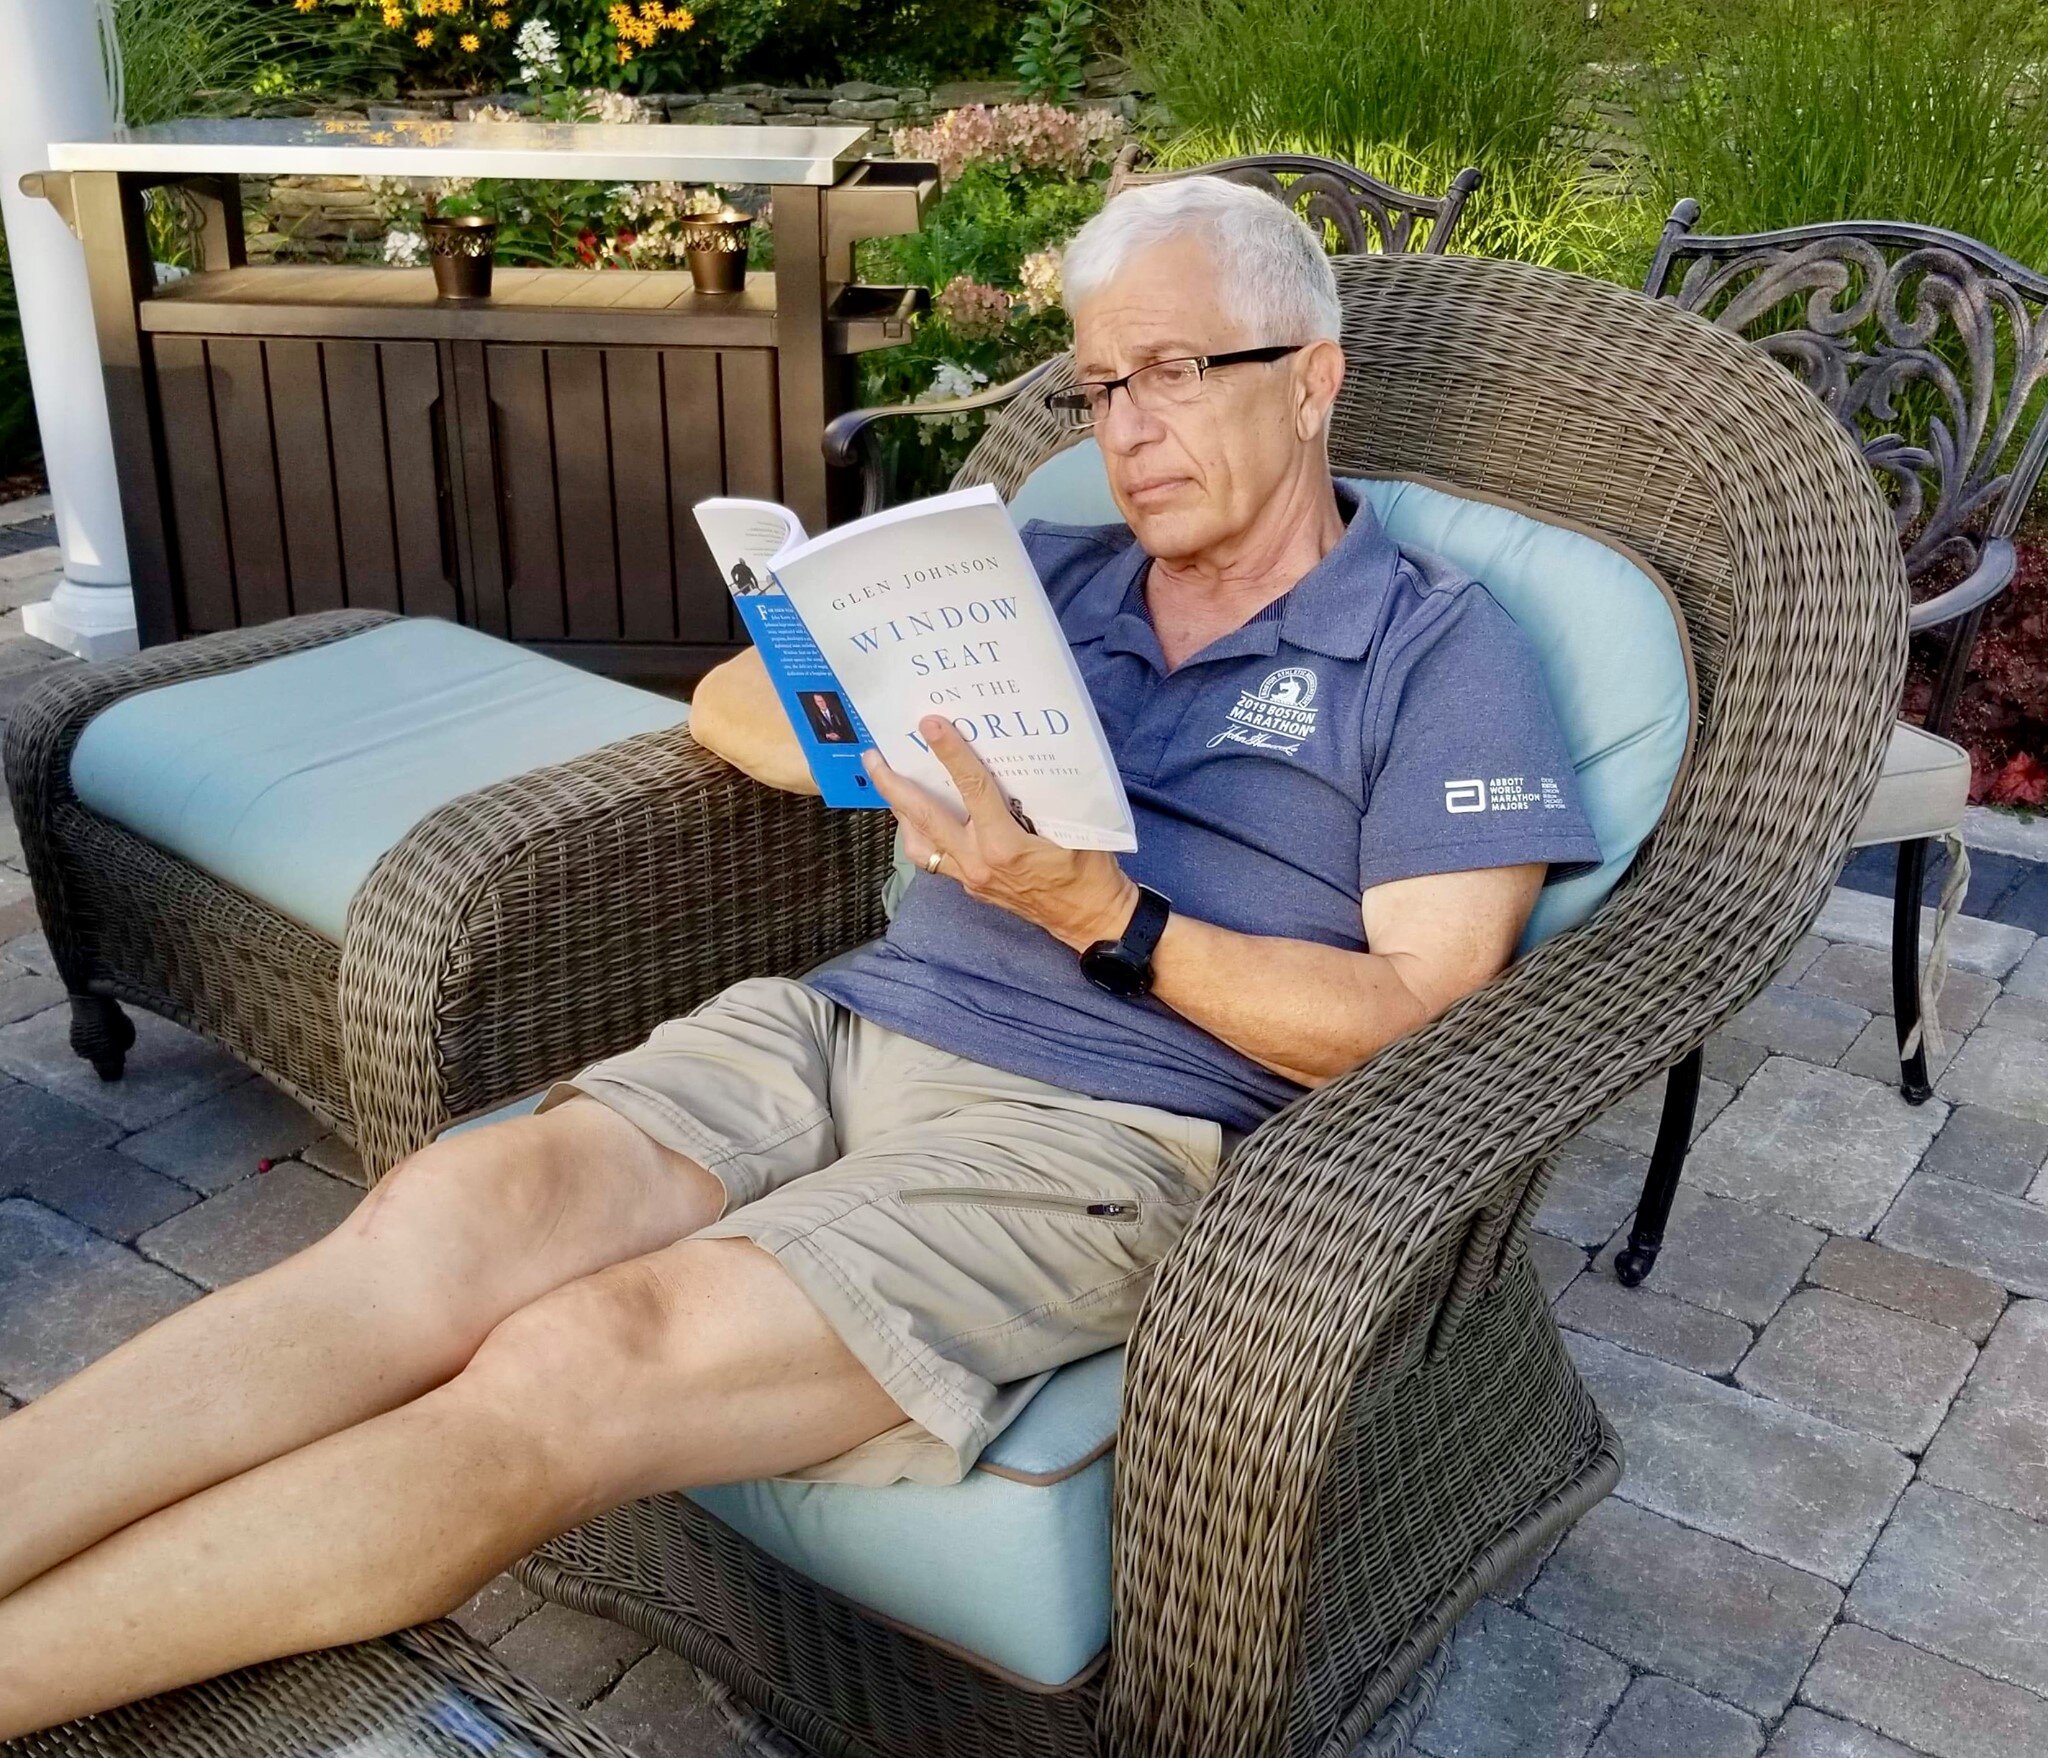  My former neighbor Tom Licciardello reads one of the two copies he bought in North Andover, Mass. 